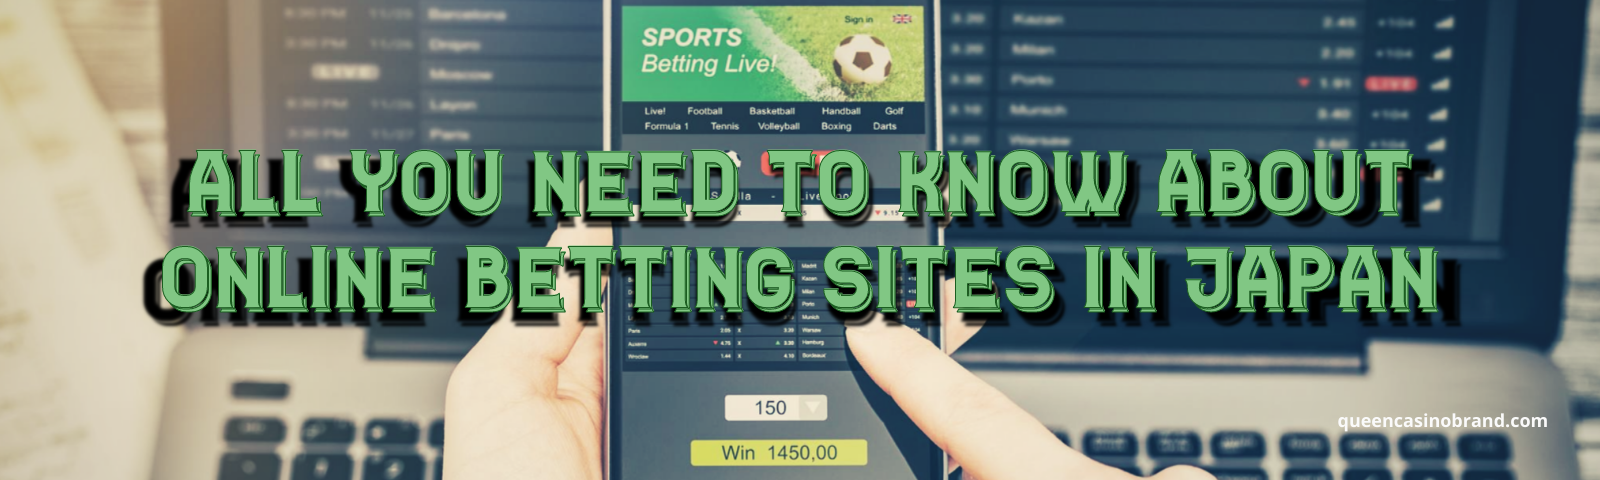 All You Need to Know About Online Betting Sites in Japan